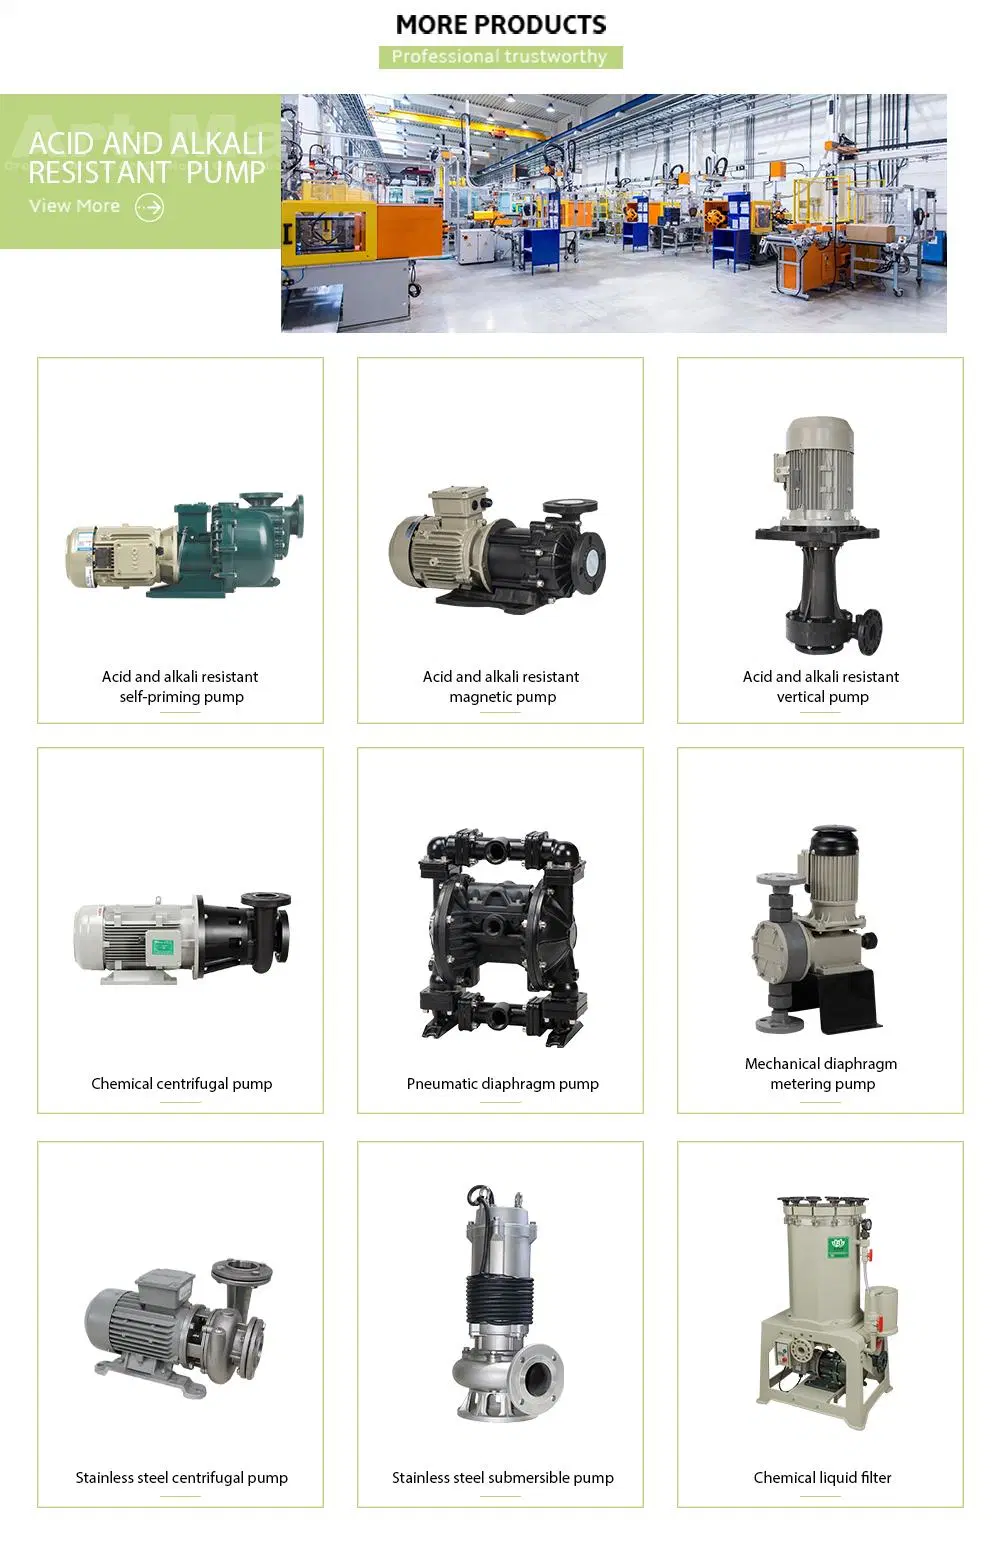 Competitive PVDF FRPP Self-Priming Pump for Sewage Transport or Treatment